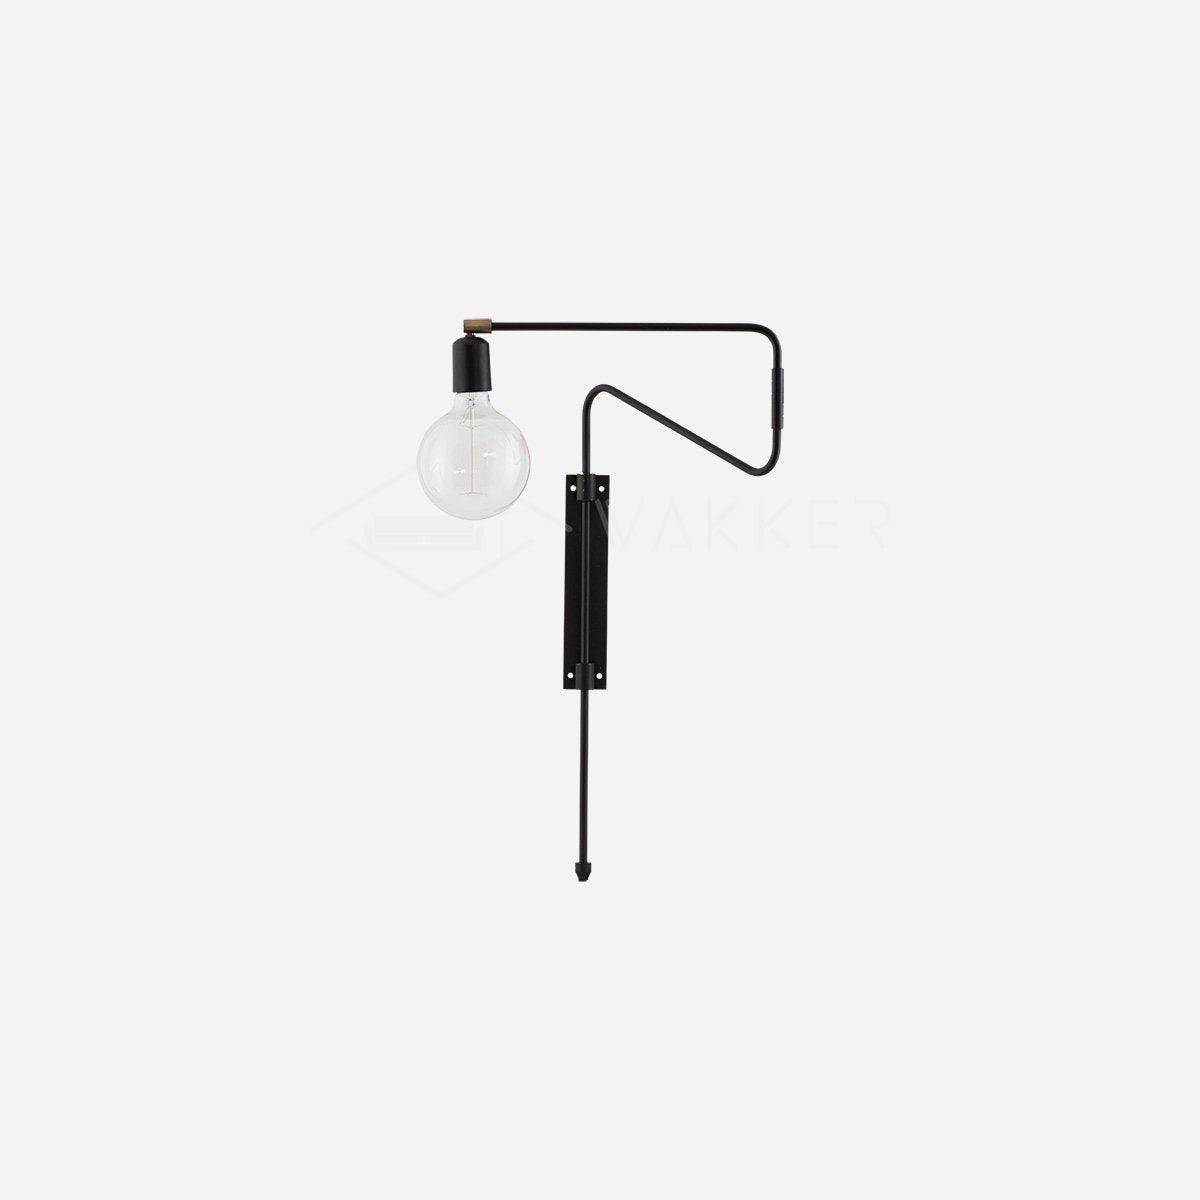 European plug Swing Wall Lamp in Black, with dimensions 27.6" in diameter and 26.4" in height (70cm x 67cm).